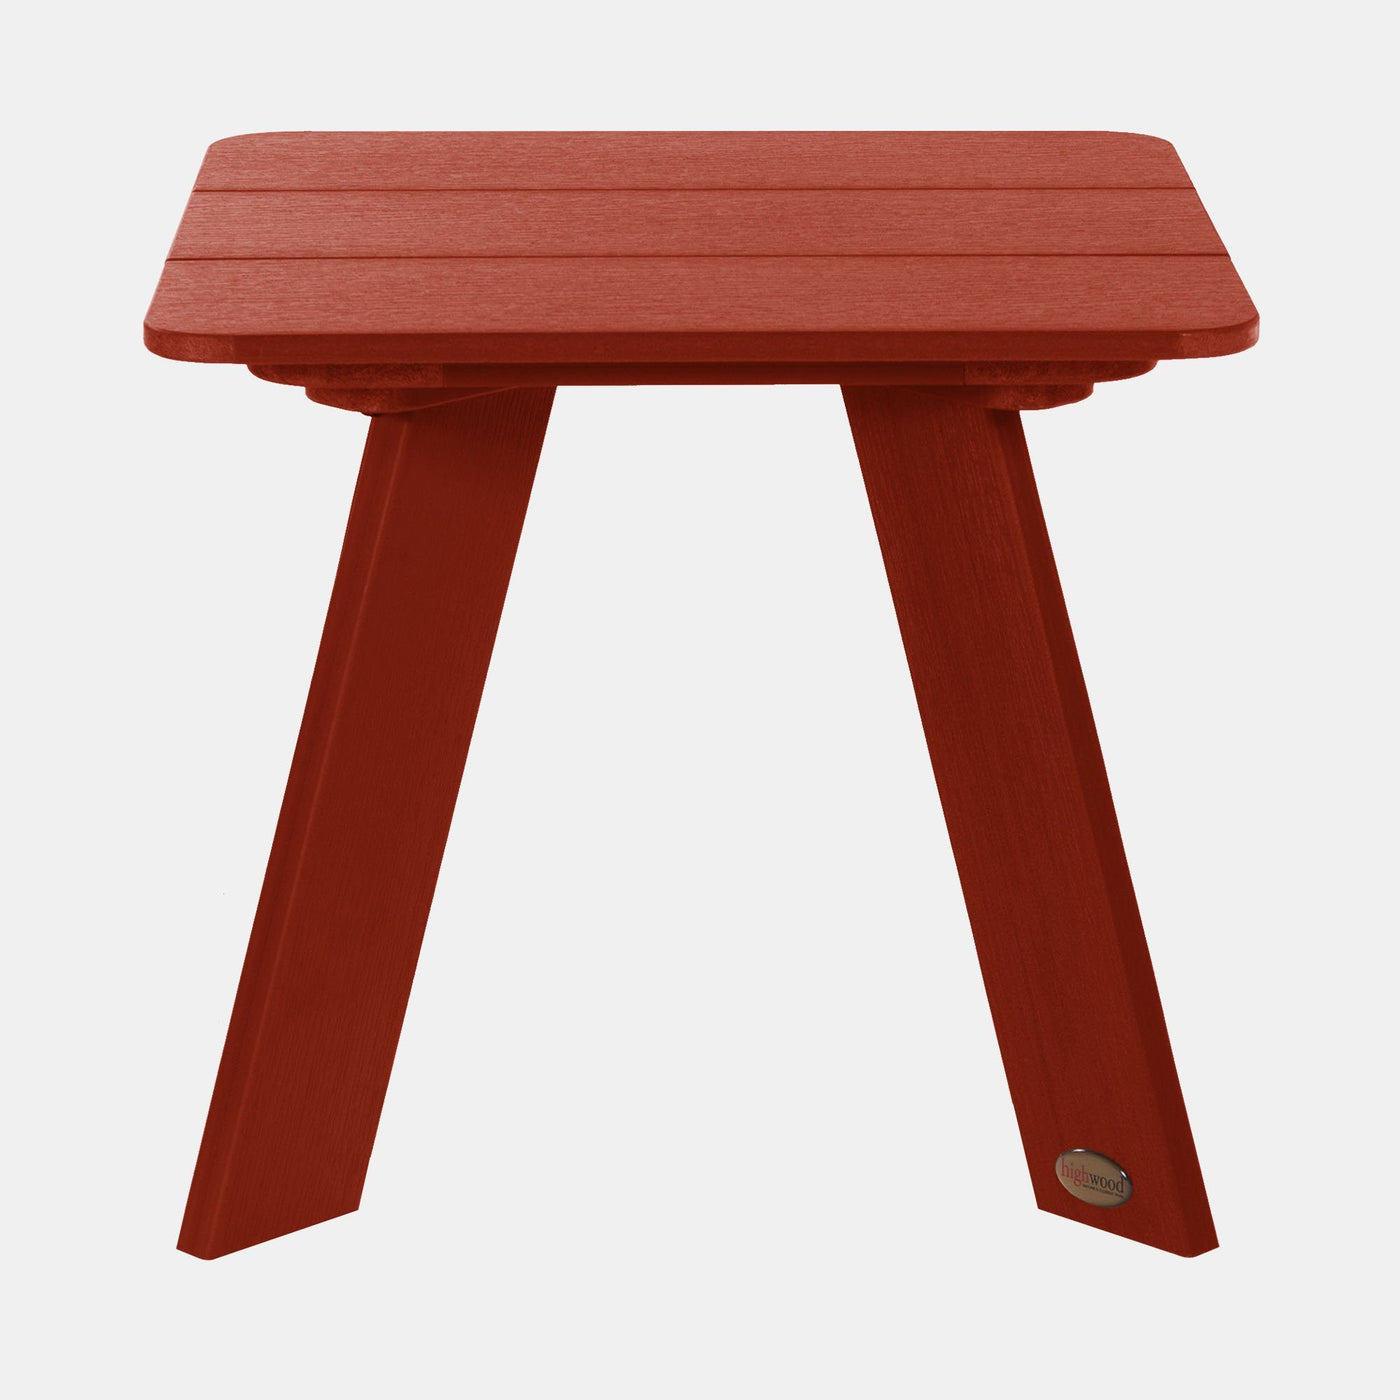 Front view of Italica Modern side table in Rustic Red